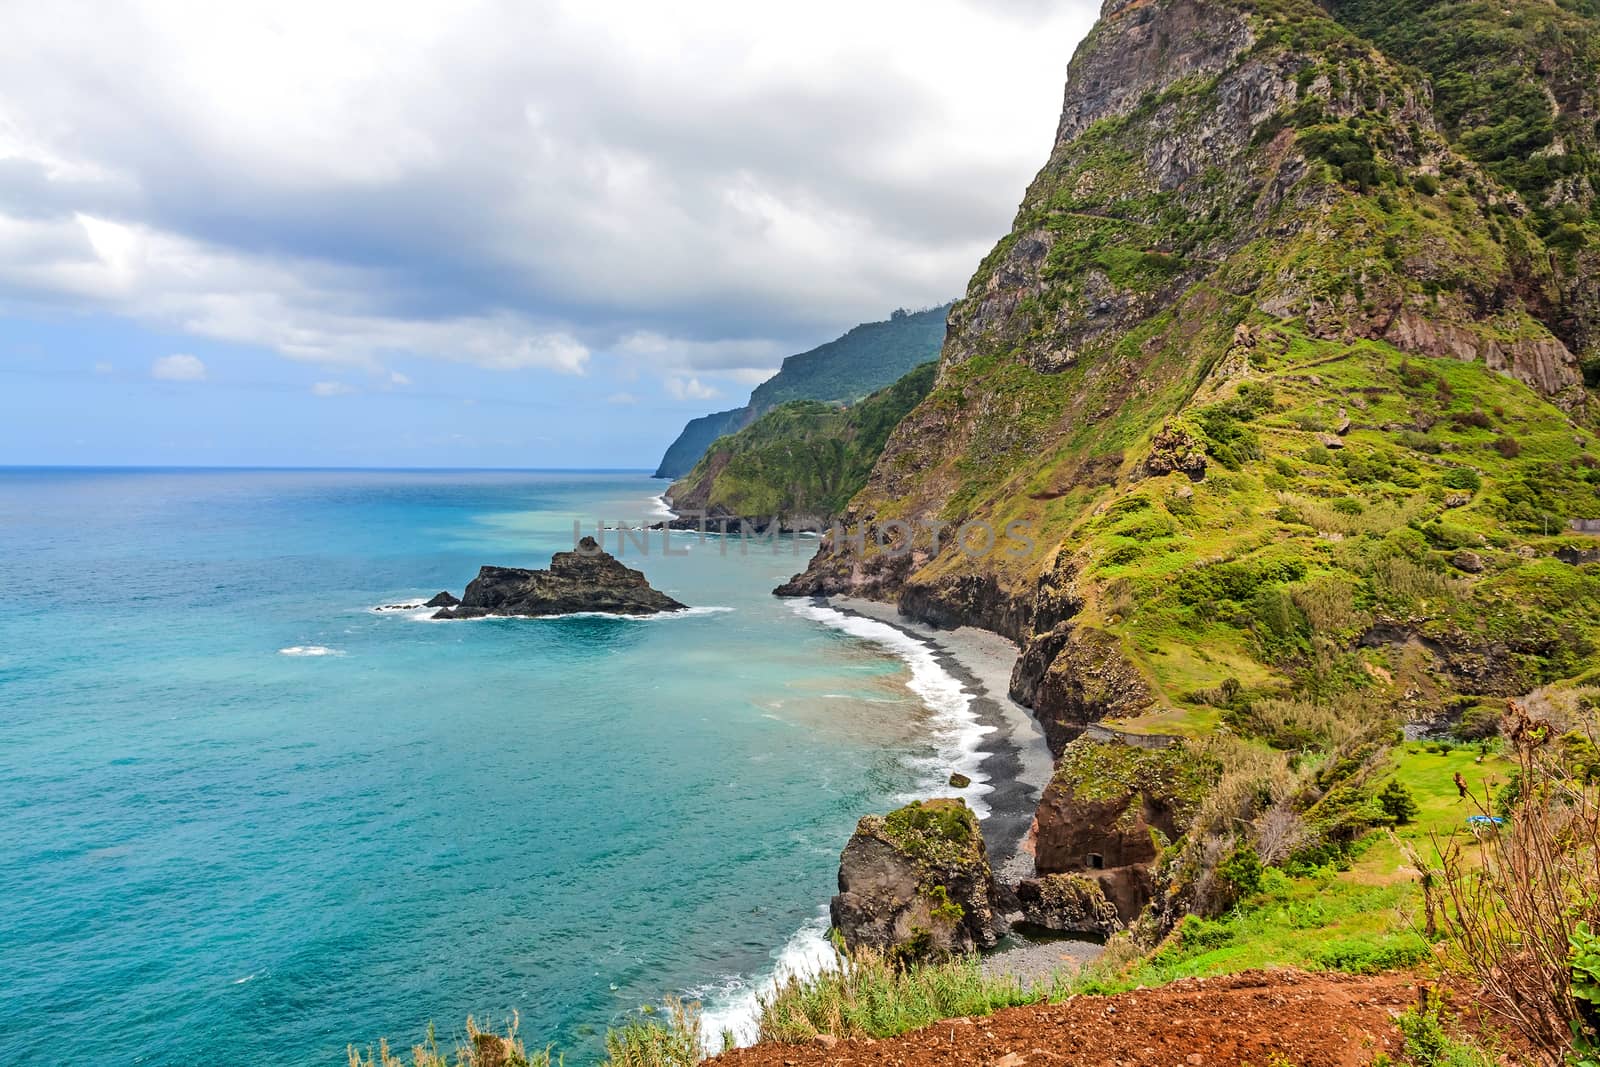 View of coast and ocean in the north near Boaventura, Madeira island, Portugal